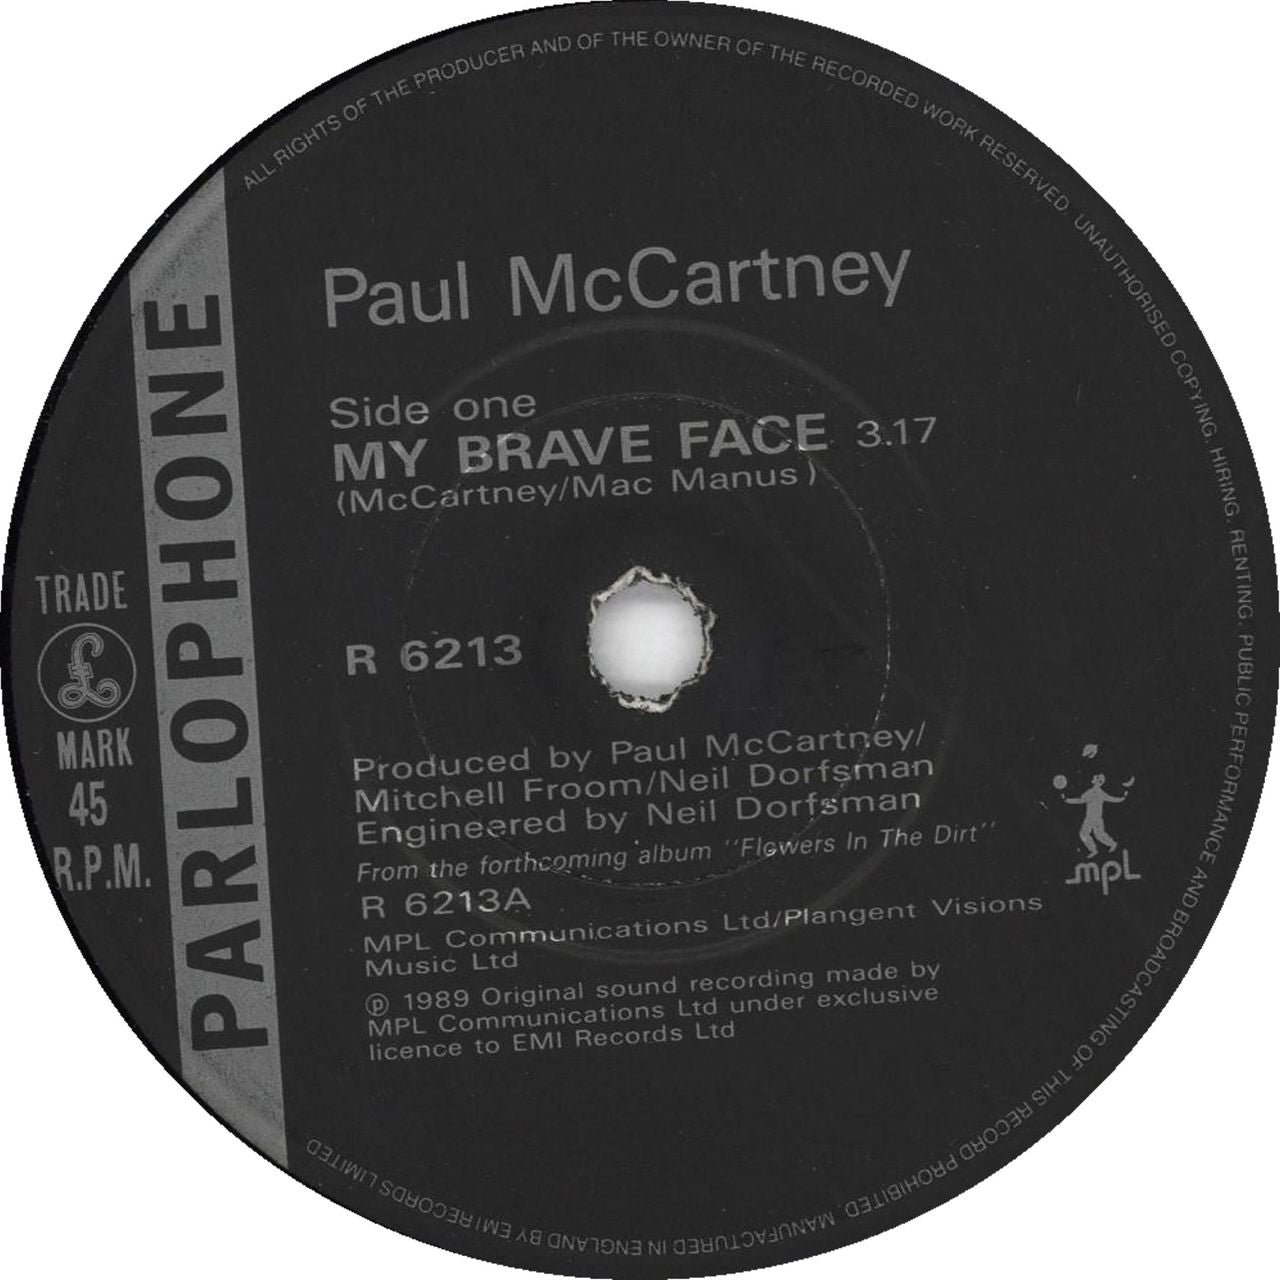 Paul McCartney and Wings My Brave Face - Black label UK 7